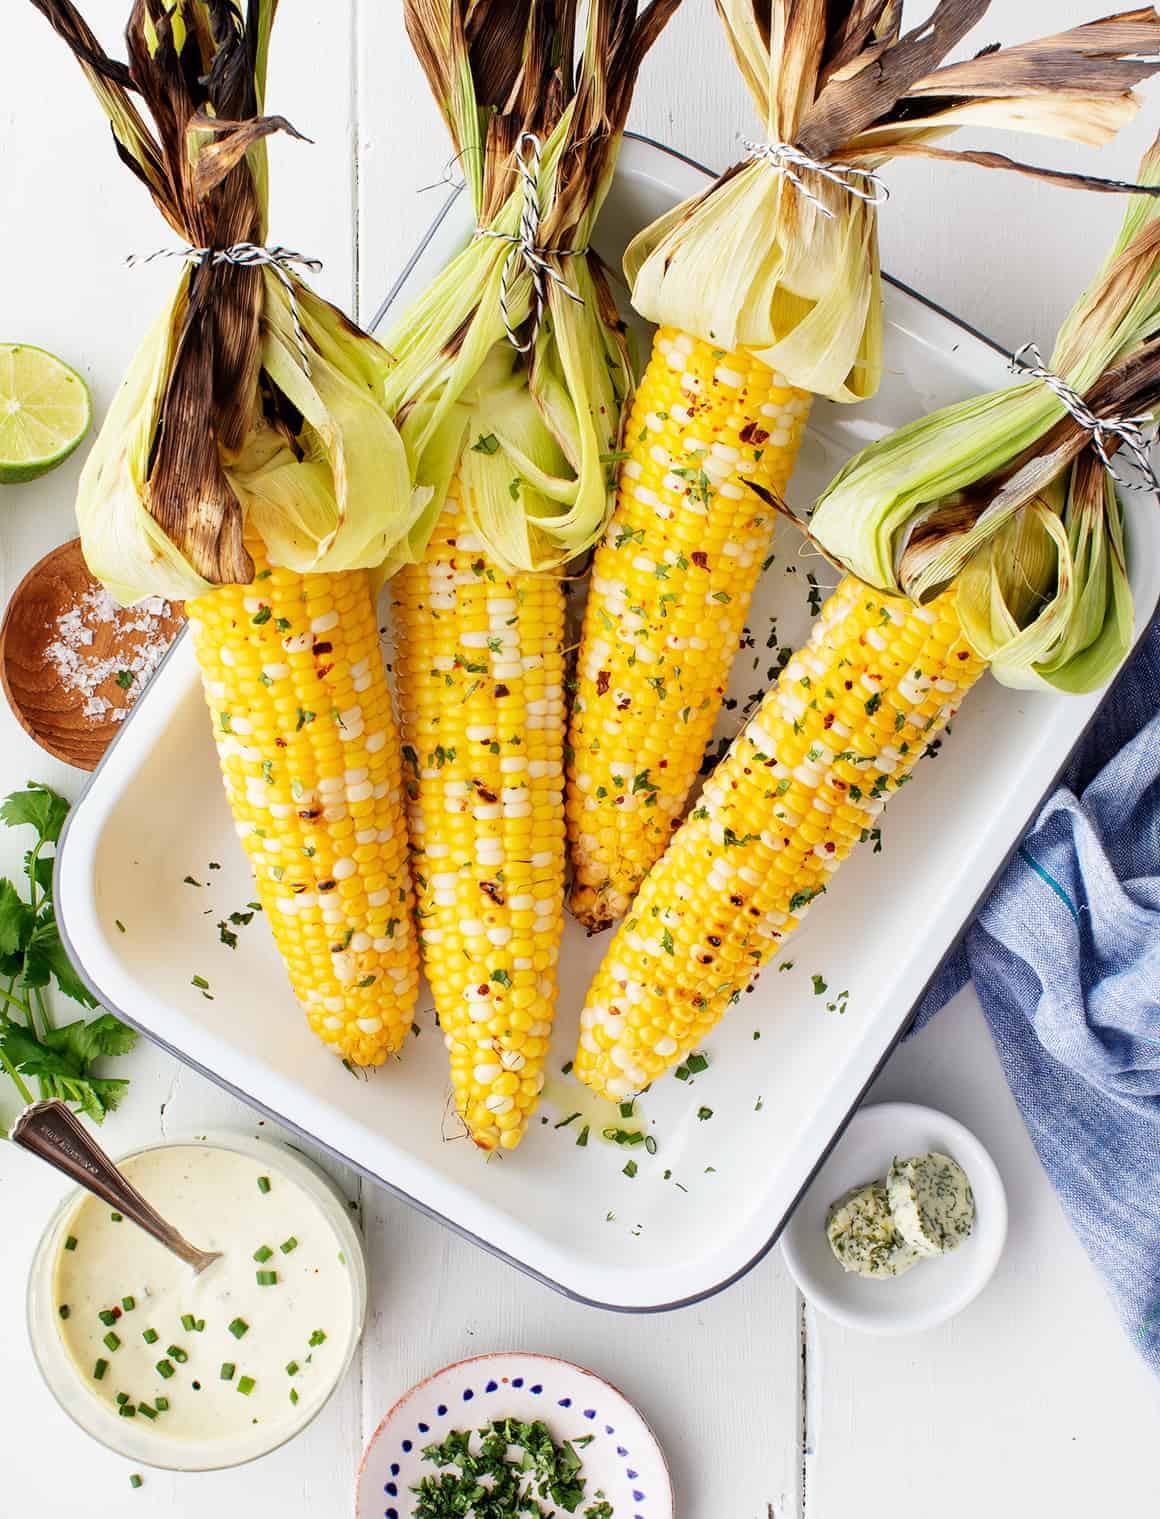 best bbq sides - grilled corn on the cob